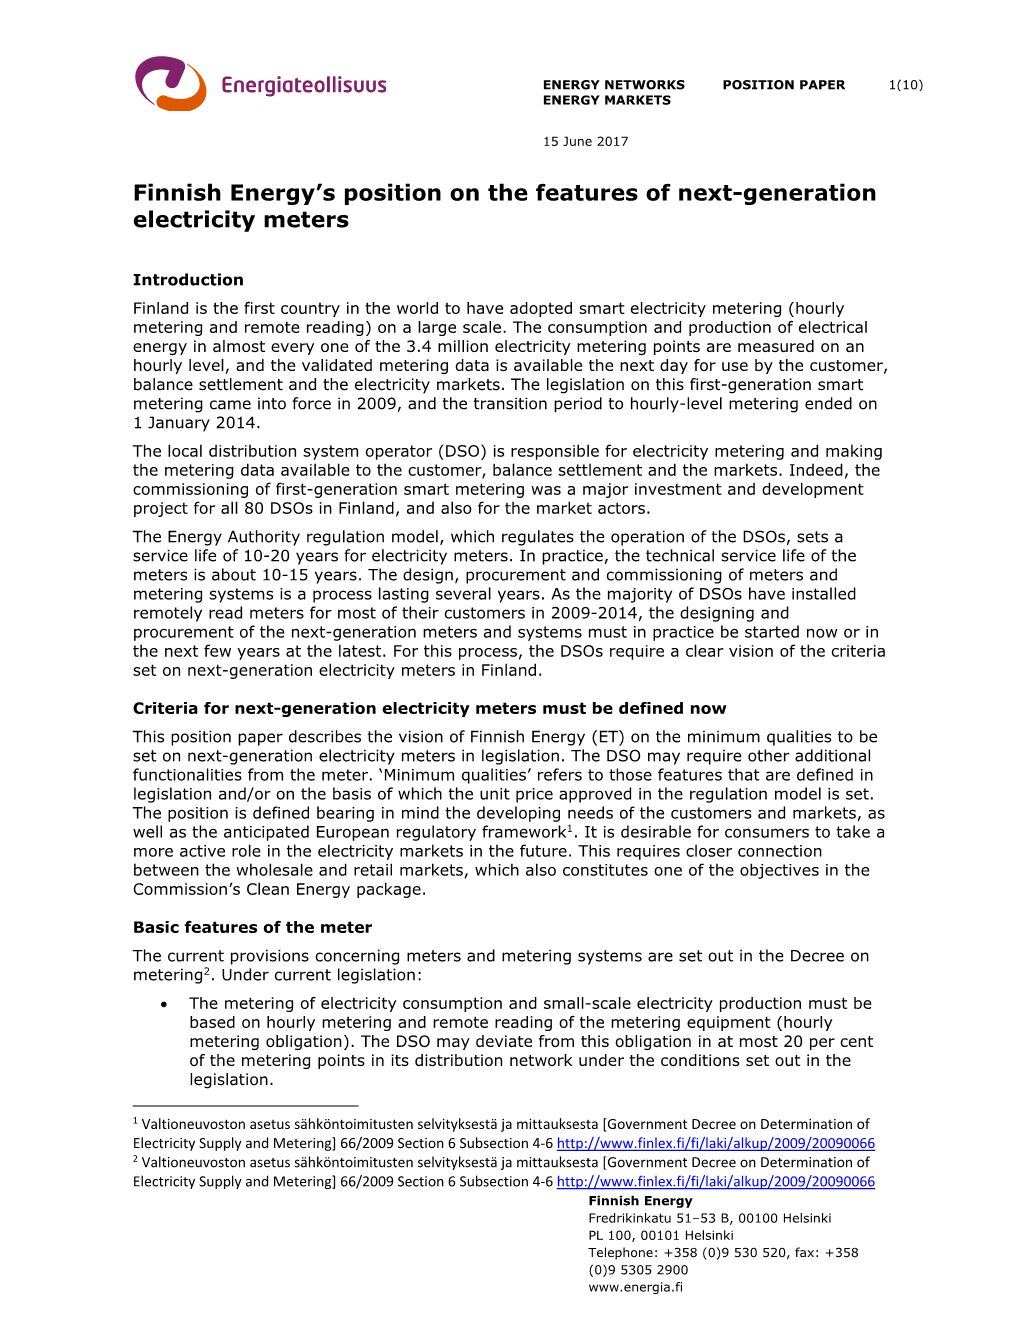 Finnish Energy's Position on the Features of Next-Generation